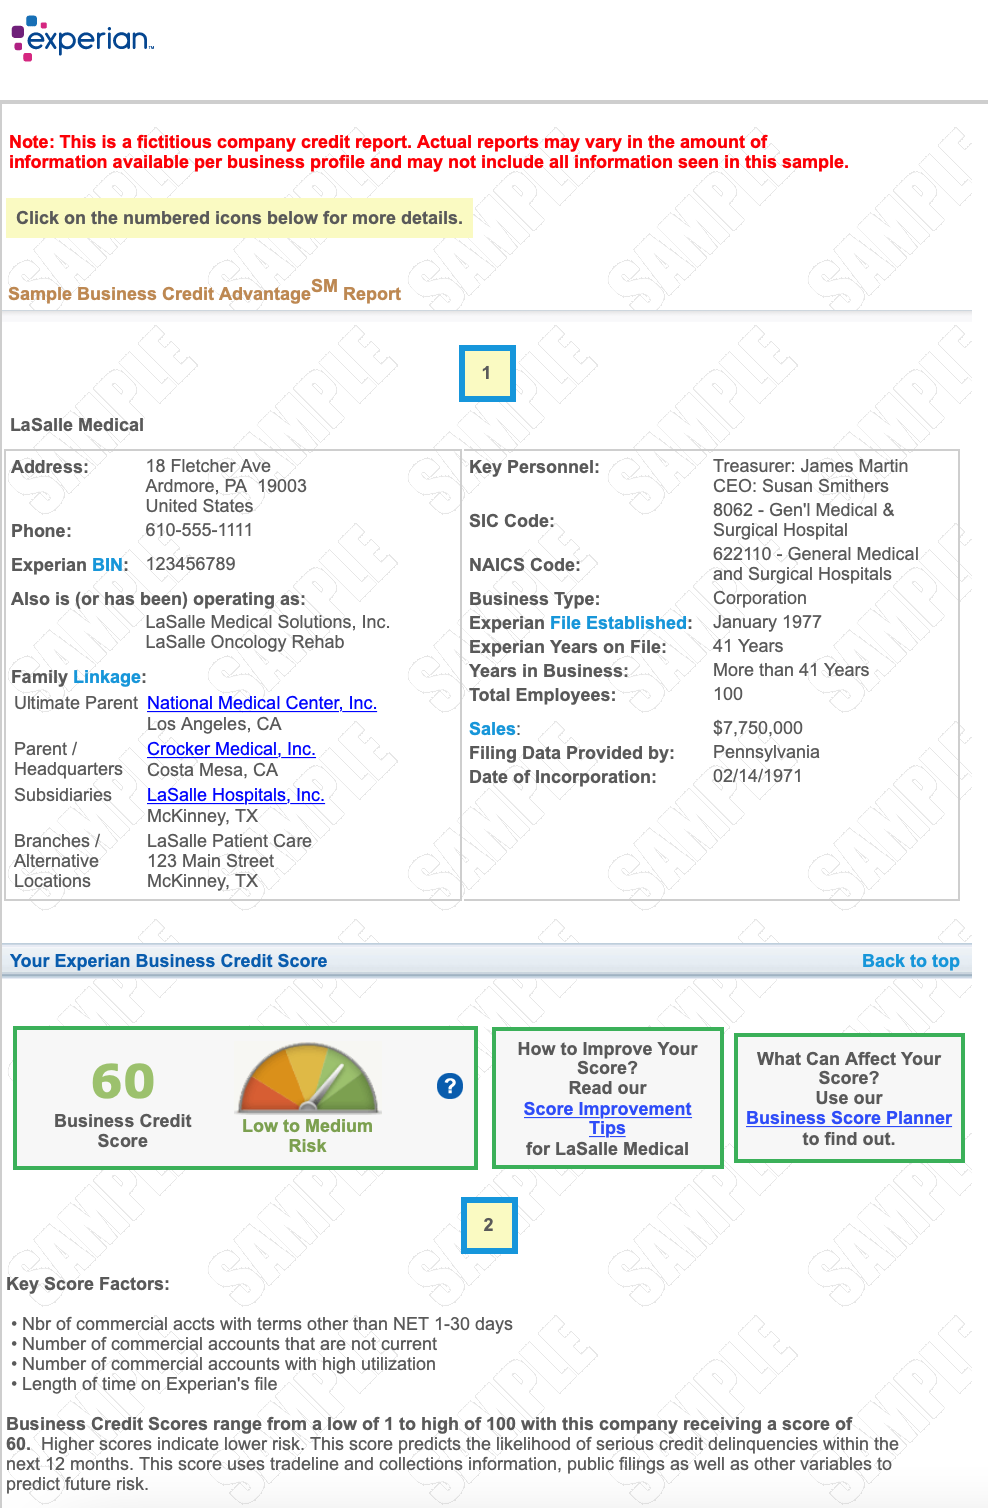 Example Experian Business Credit Report